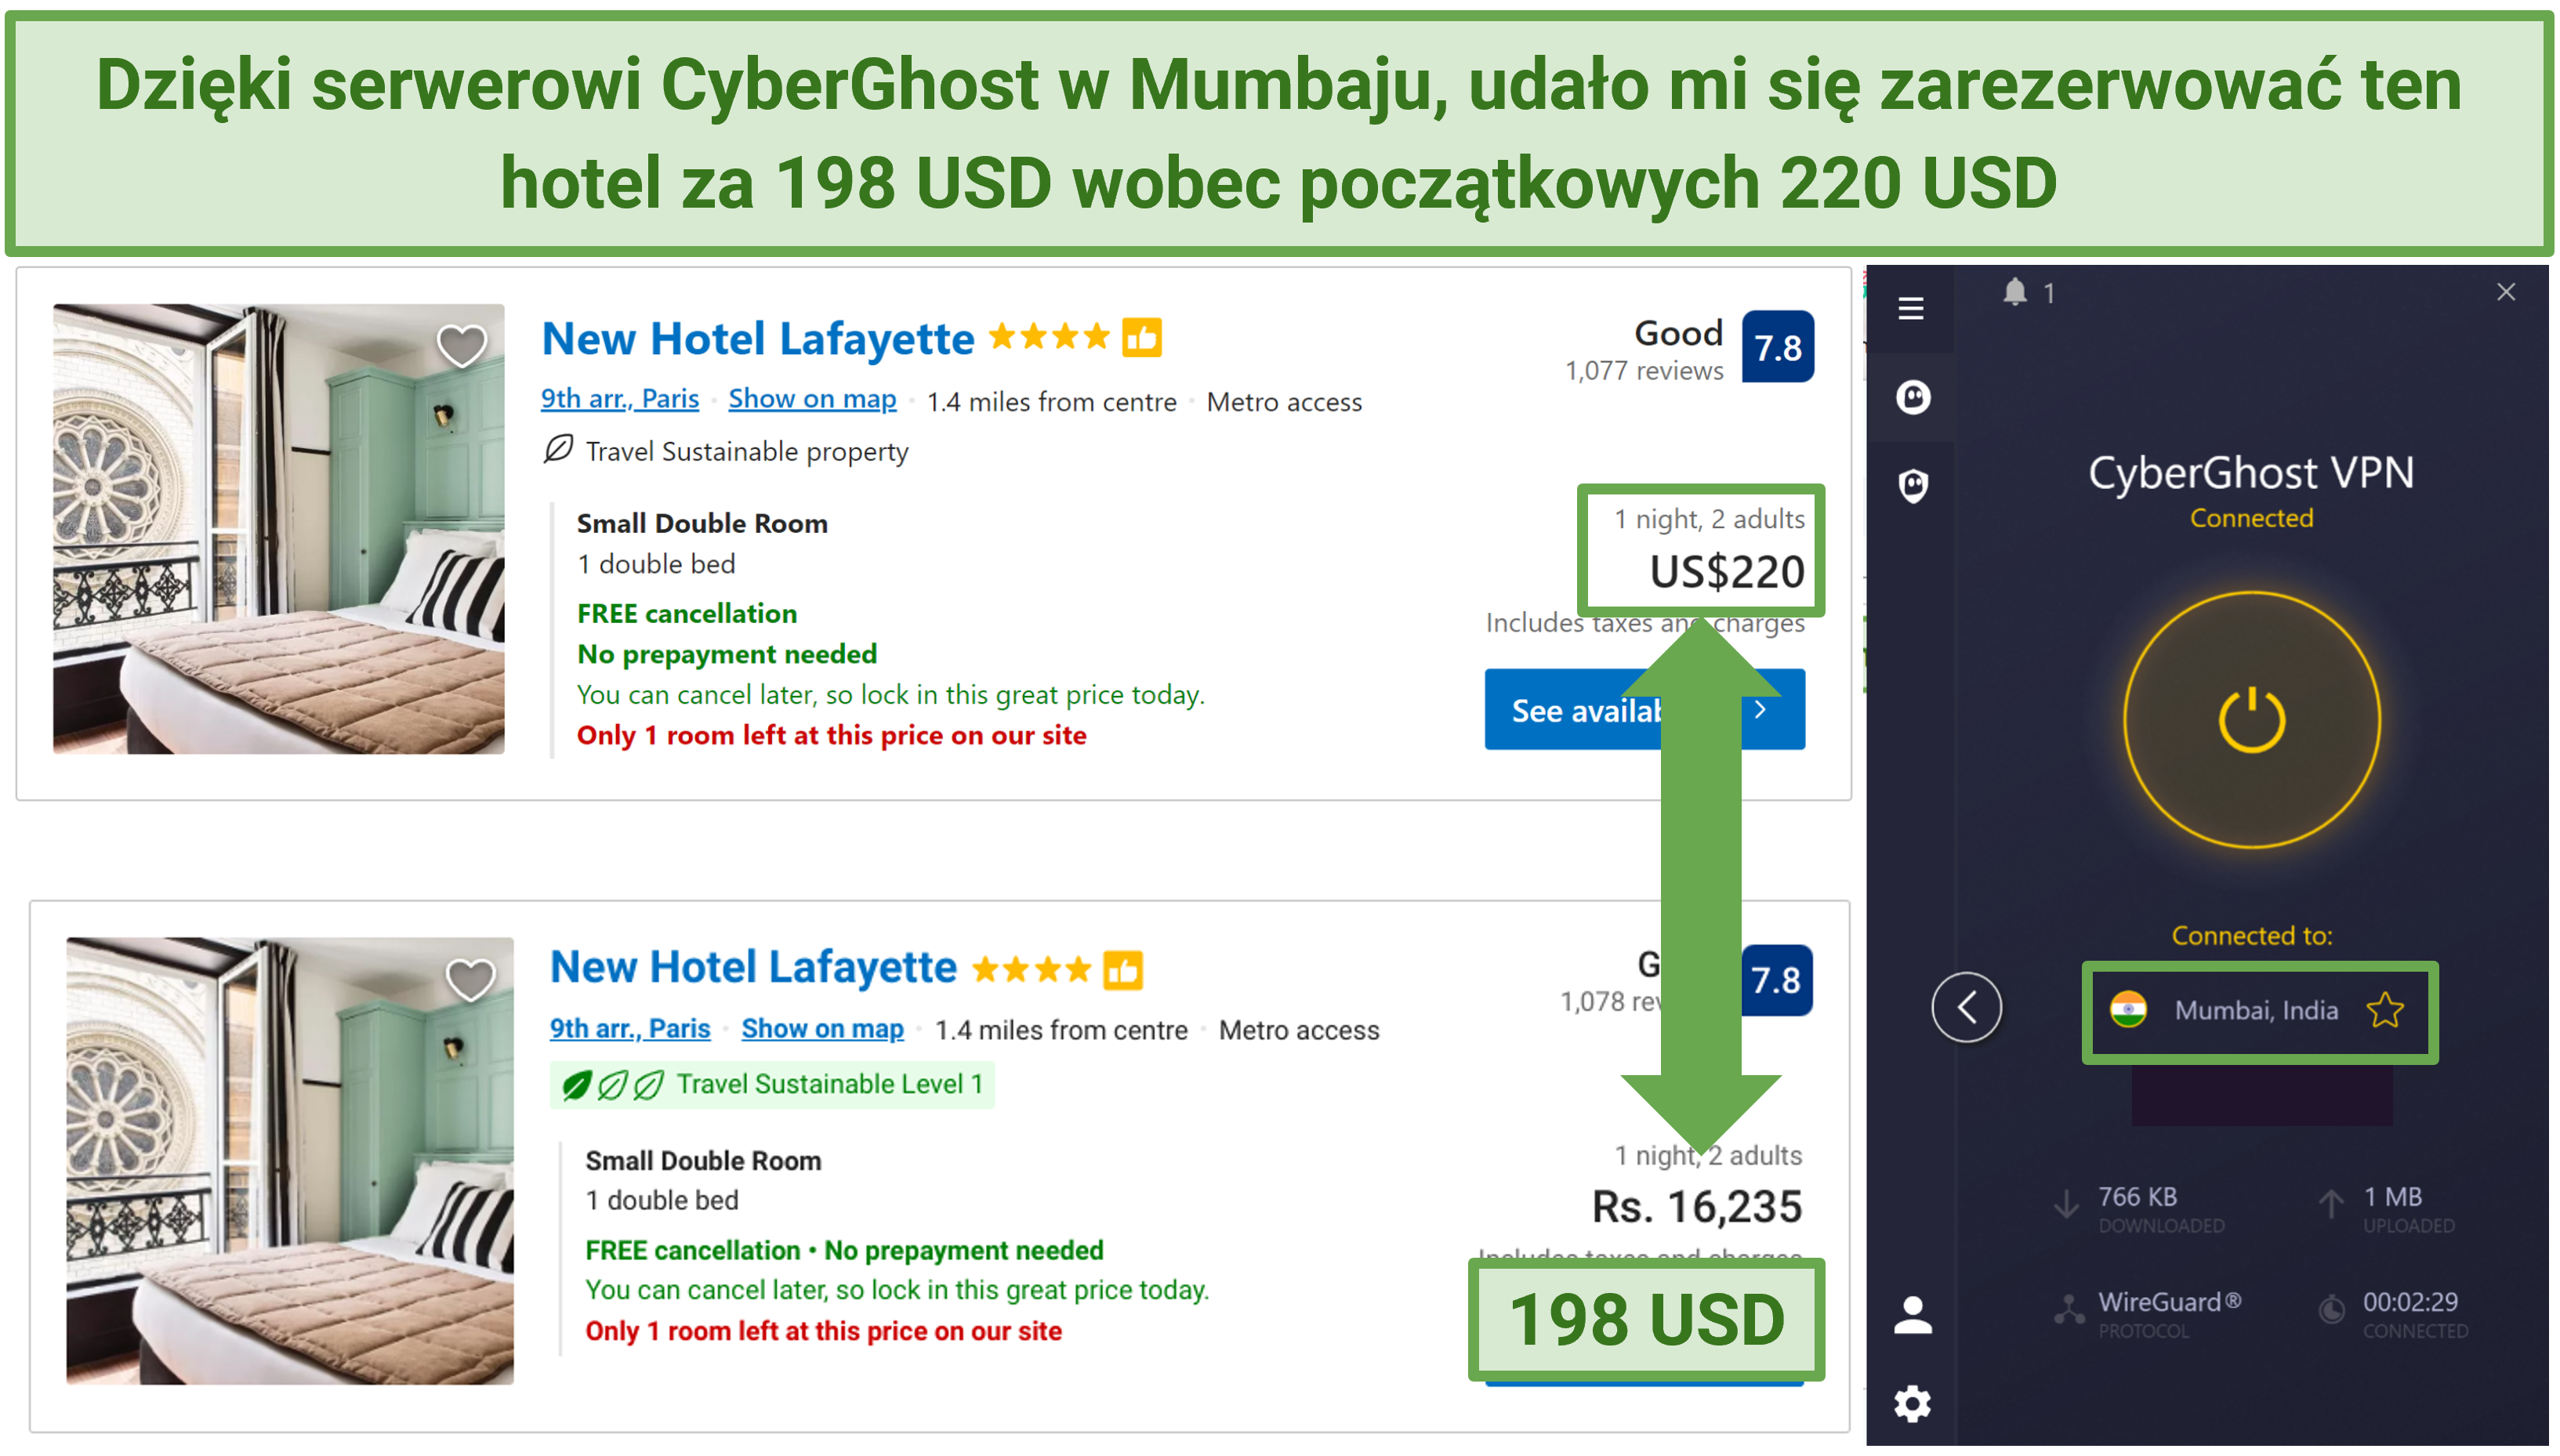 Screenshot of hotel prices on Booking.com with discounts when connected to CyberGhost's Mumbai server